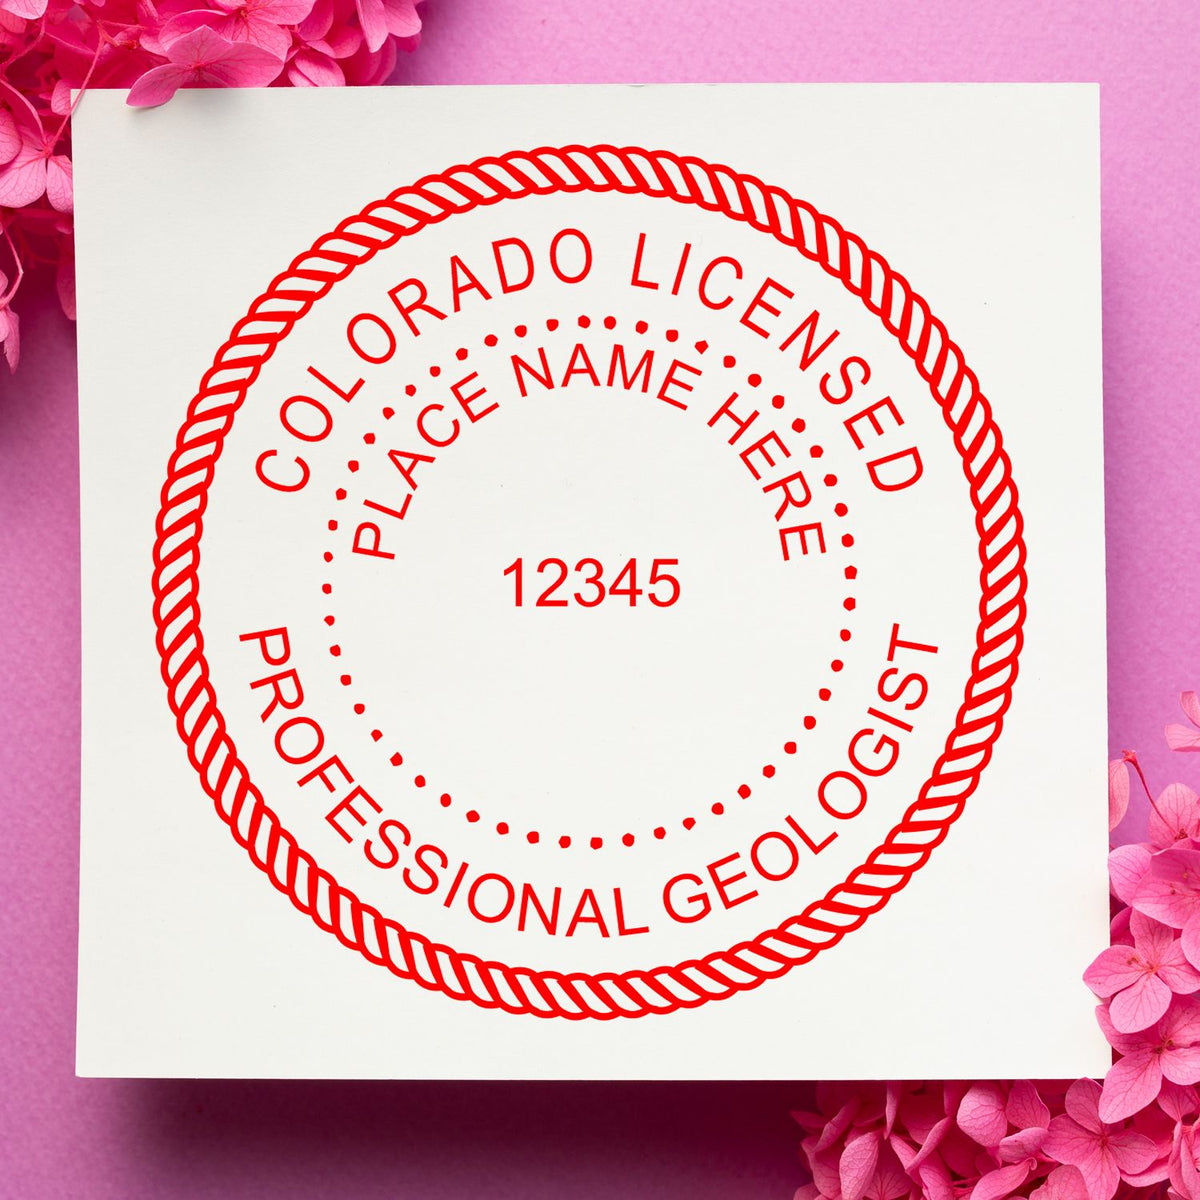 A stamped imprint of the Slim Pre-Inked Colorado Professional Geologist Seal Stamp in this stylish lifestyle photo, setting the tone for a unique and personalized product.